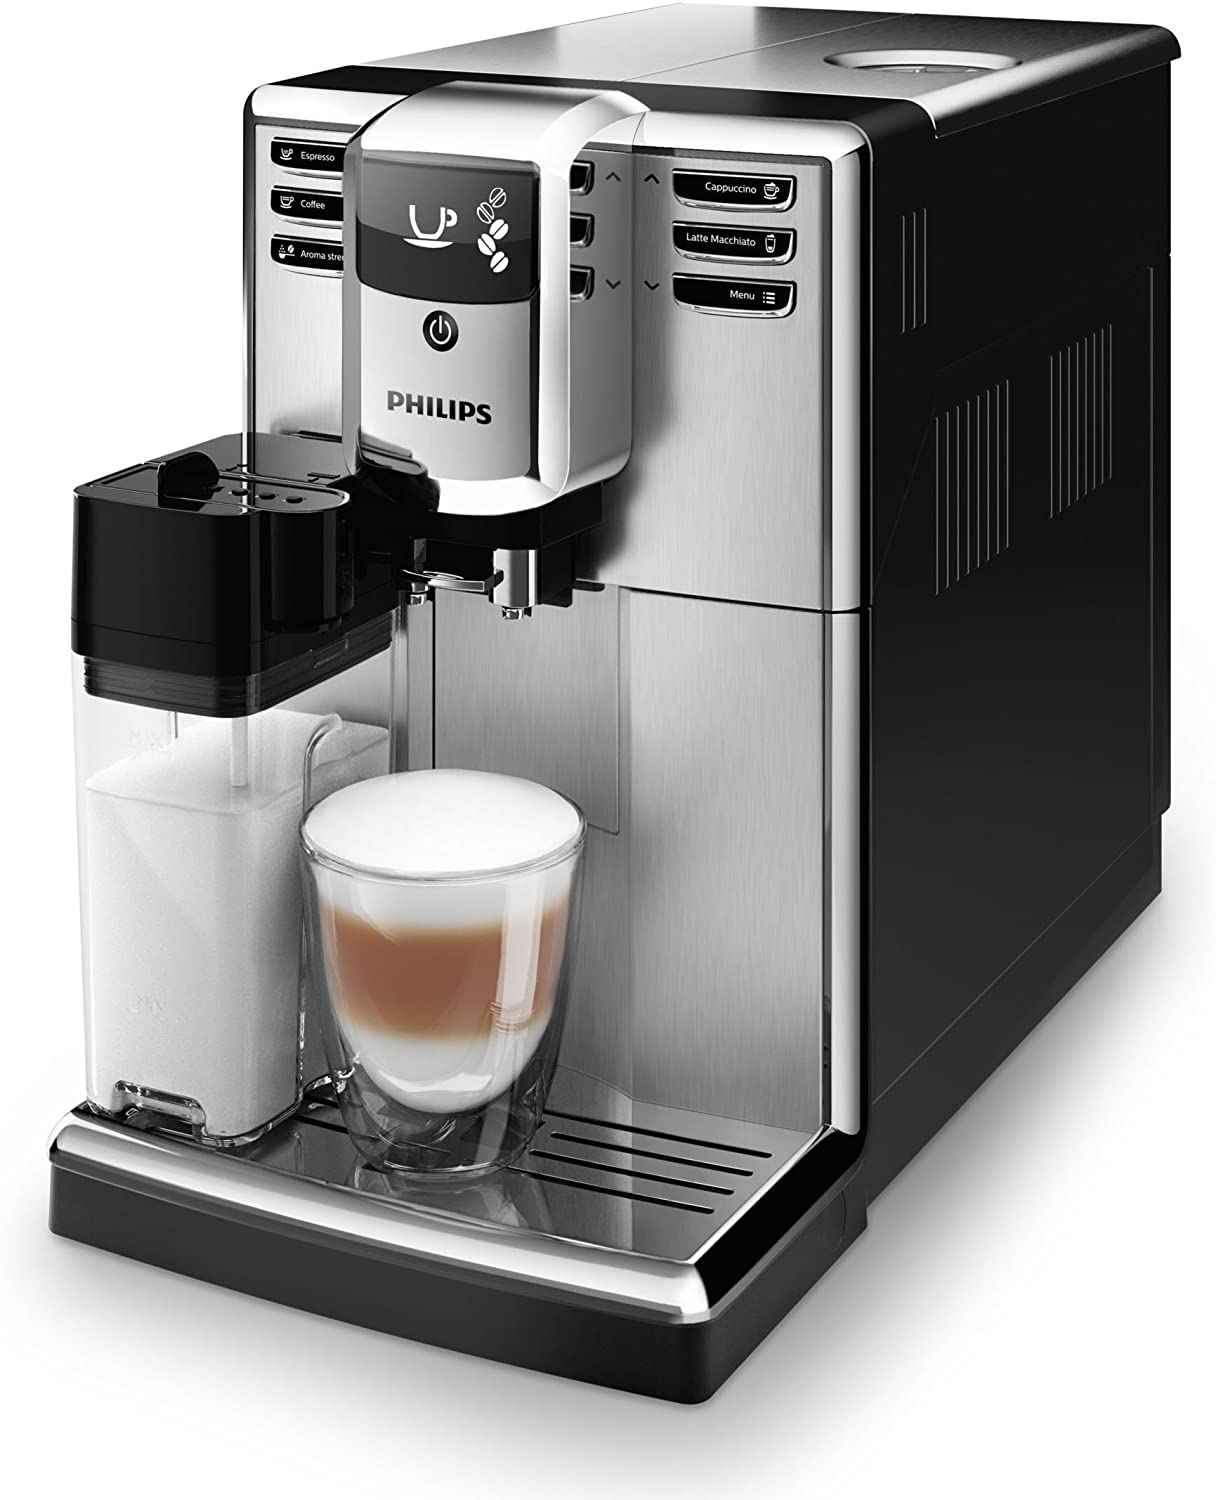 Philips 5000 Fully Automatic Coffee Machine, Carafe